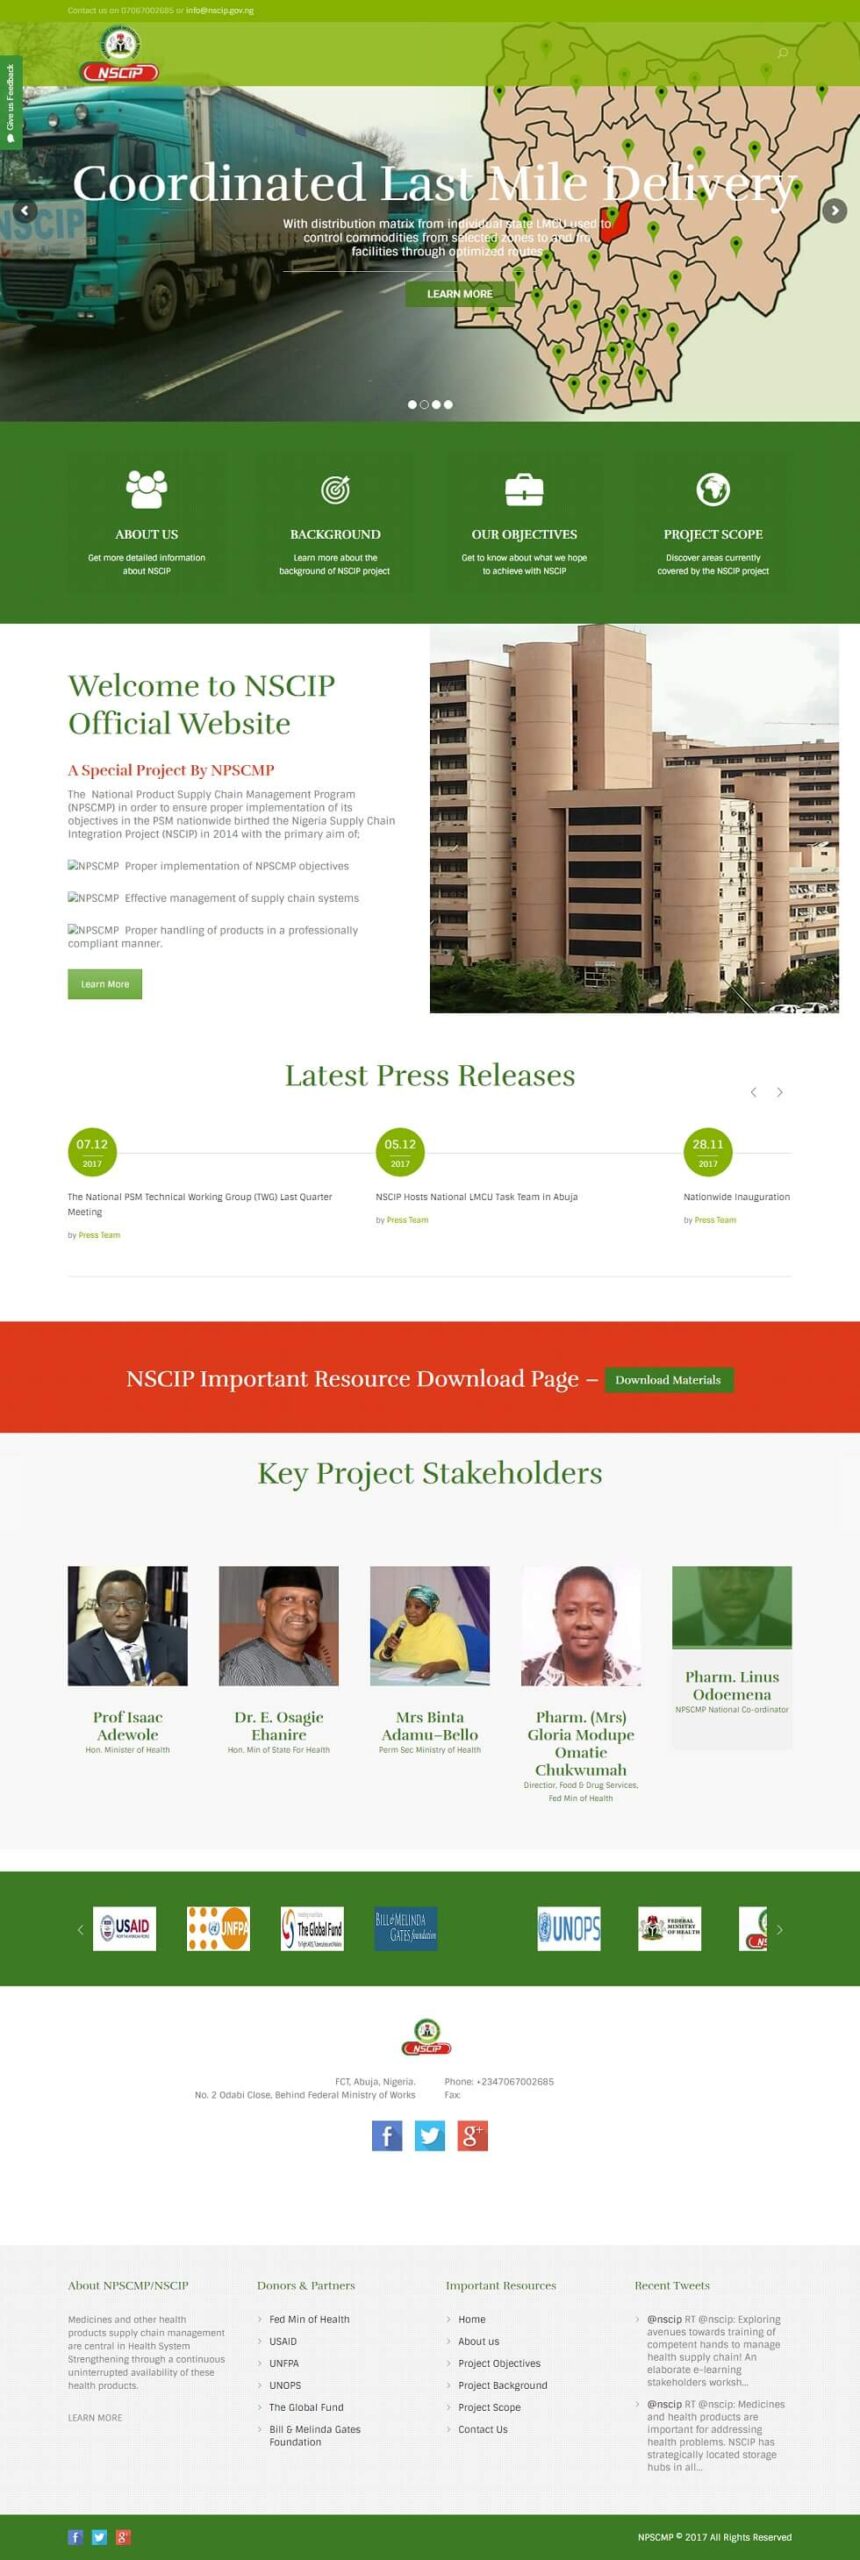 Government Website for NSCIP